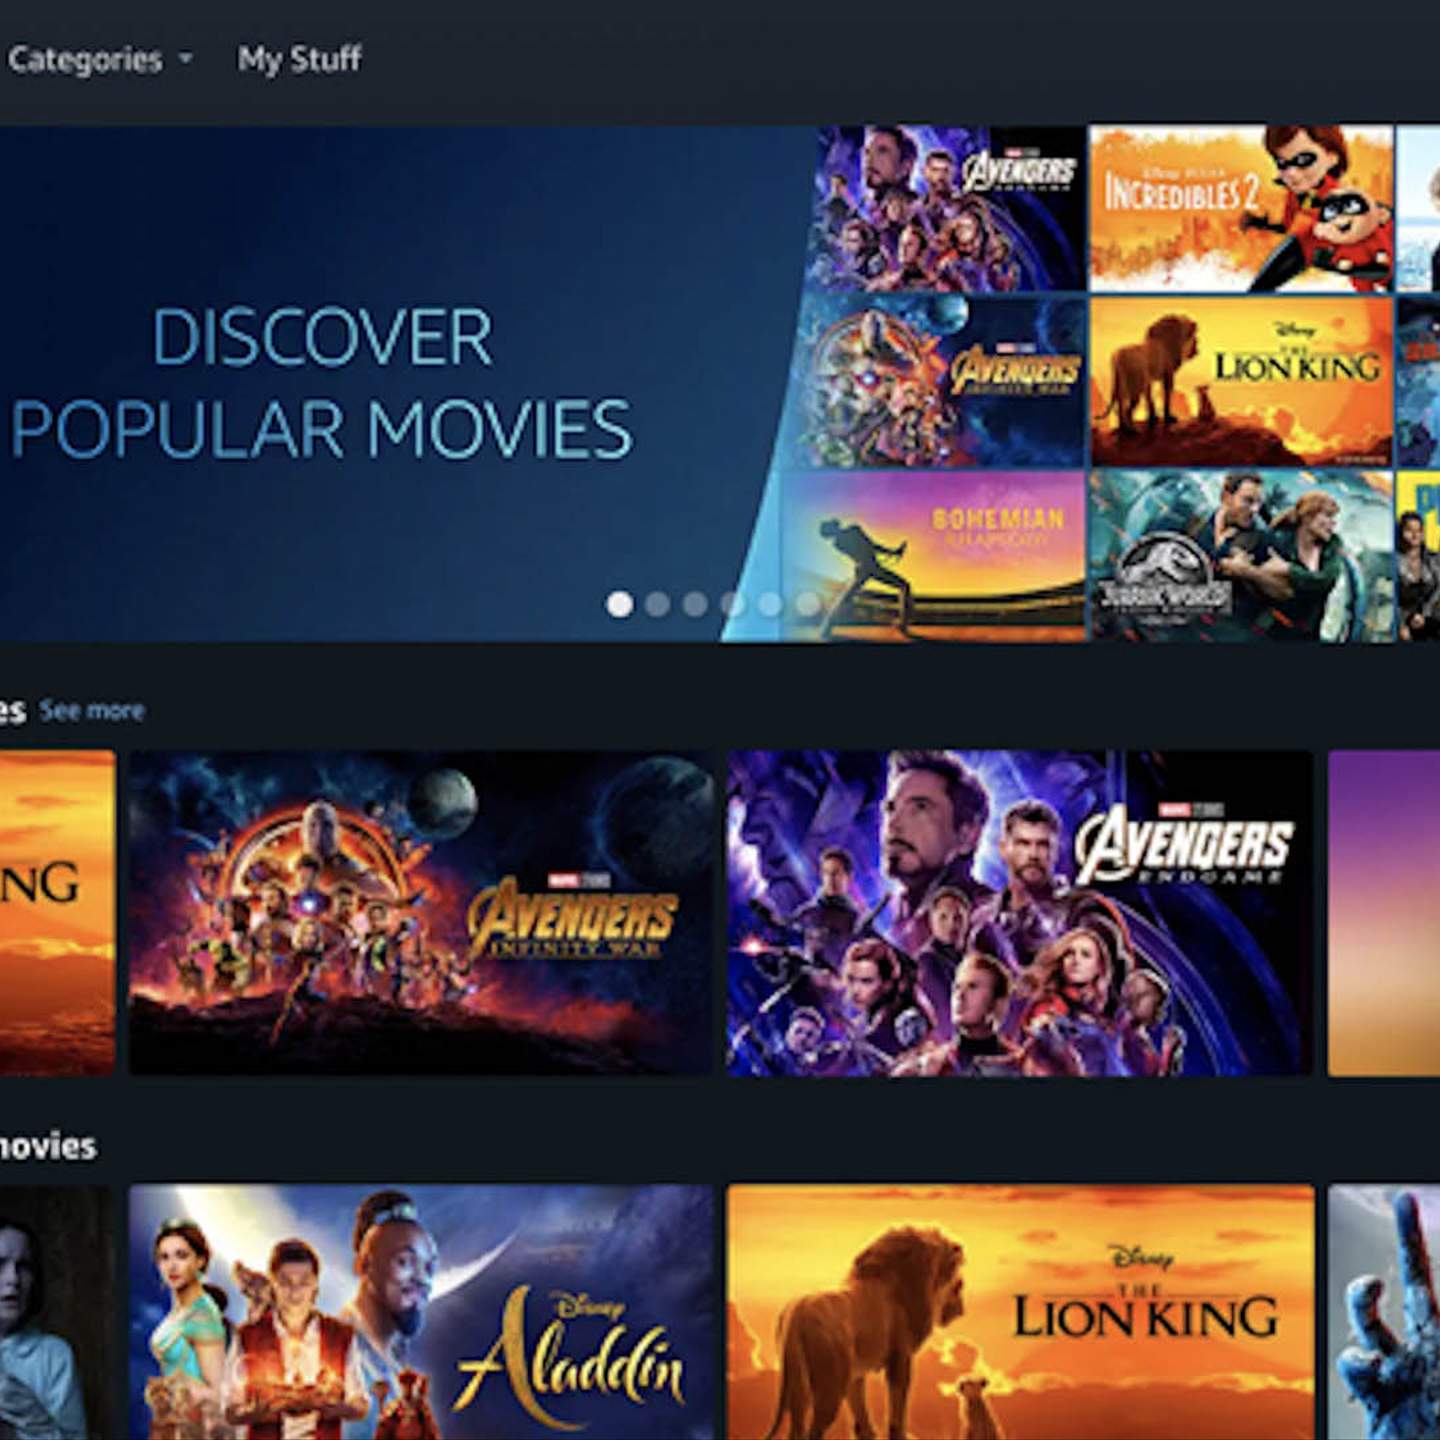 Amazon Has Launched Its Online Video Store in Australia